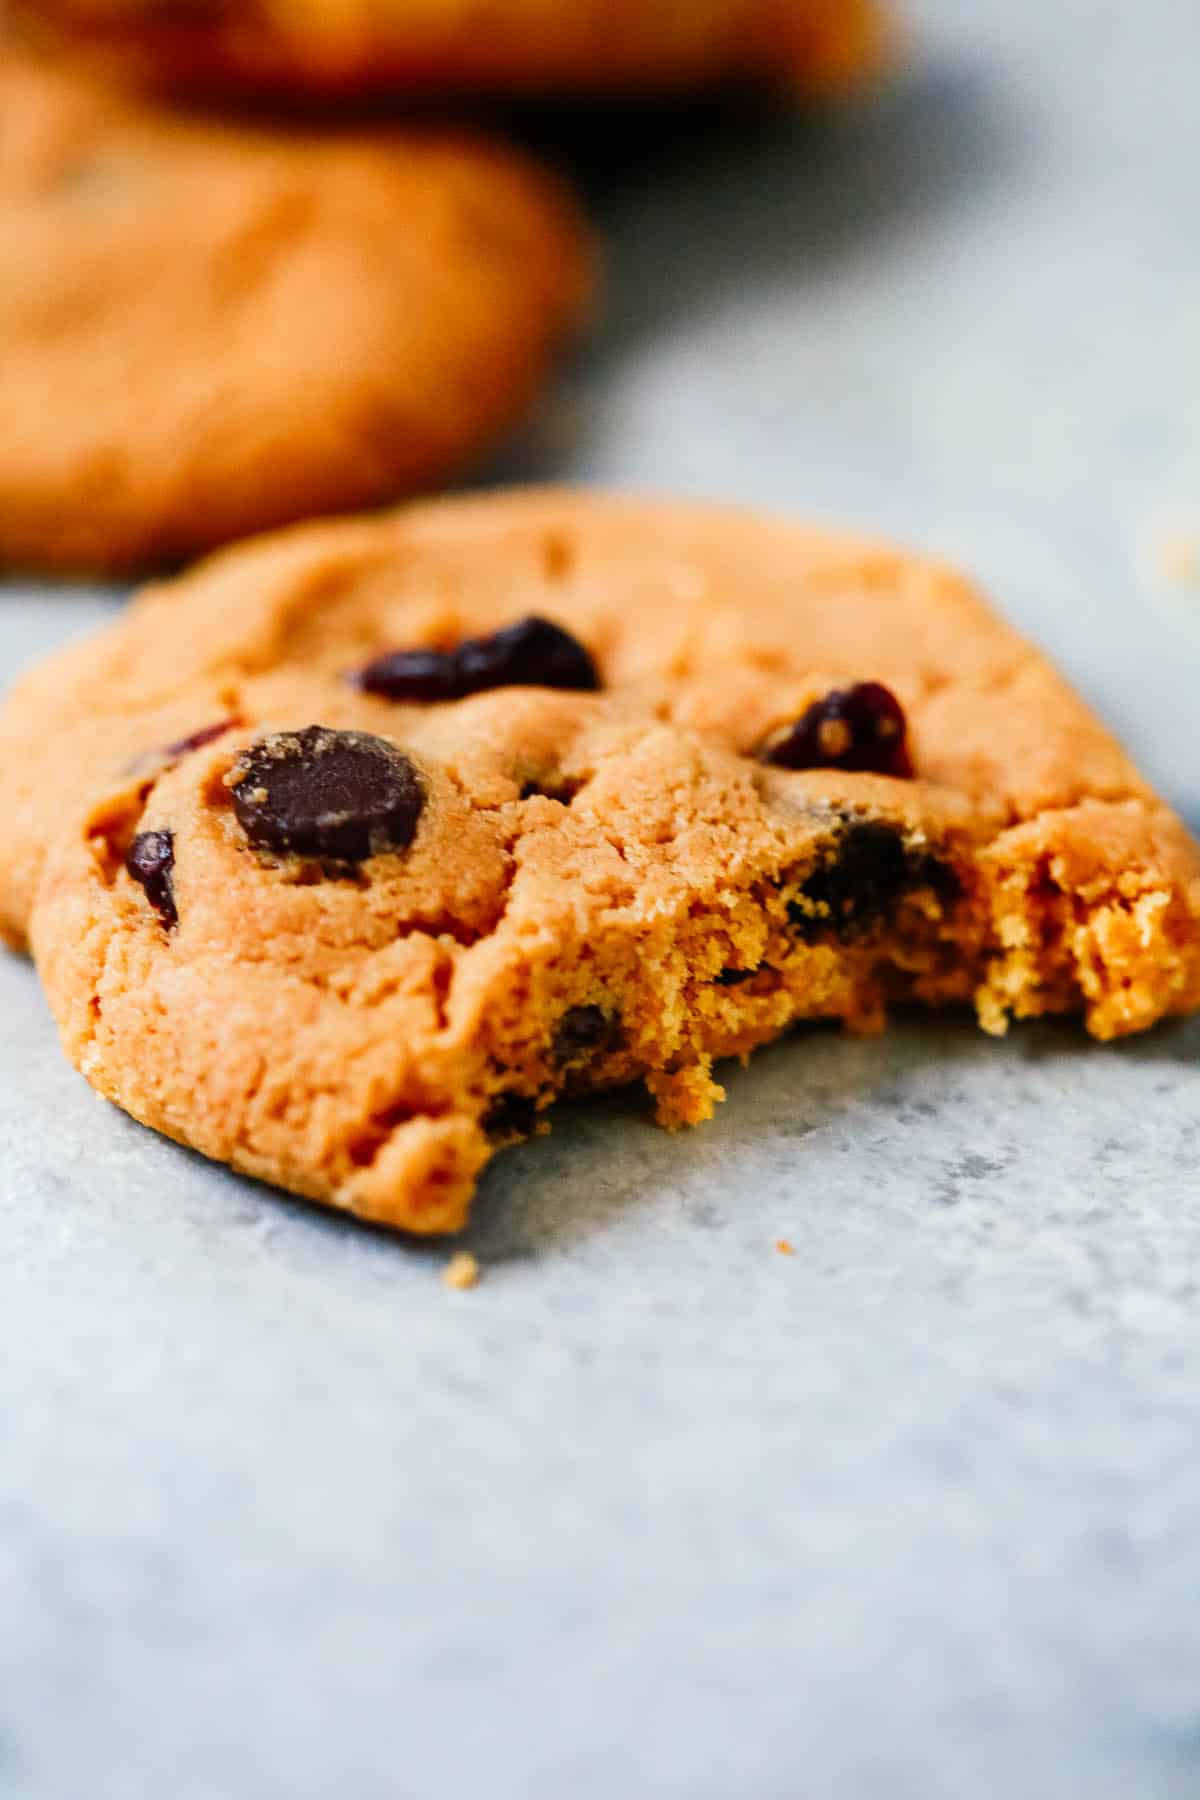 A single cranberry chocolate chip cookies with a bite taken out of it.